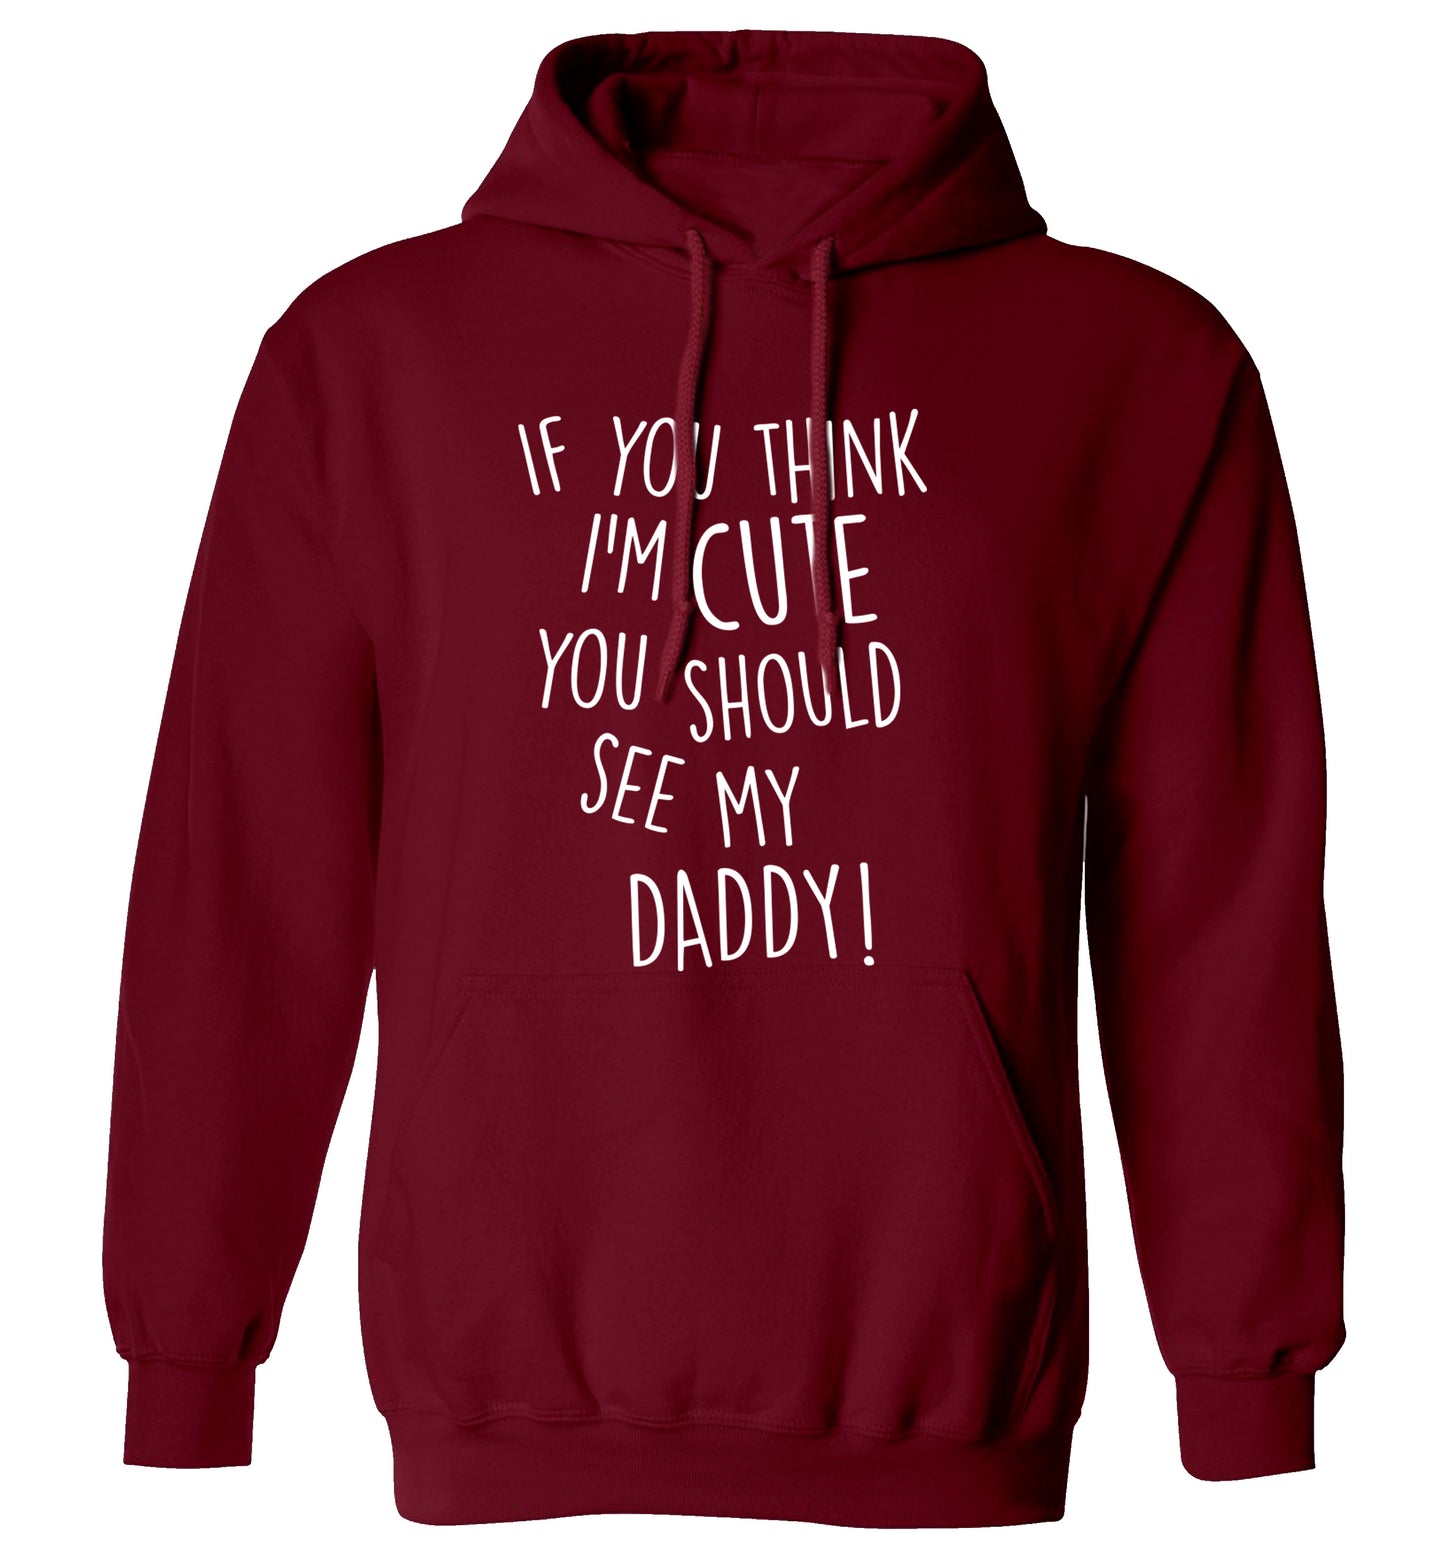 If you think I'm cute you should see my daddy adults unisex maroon hoodie 2XL